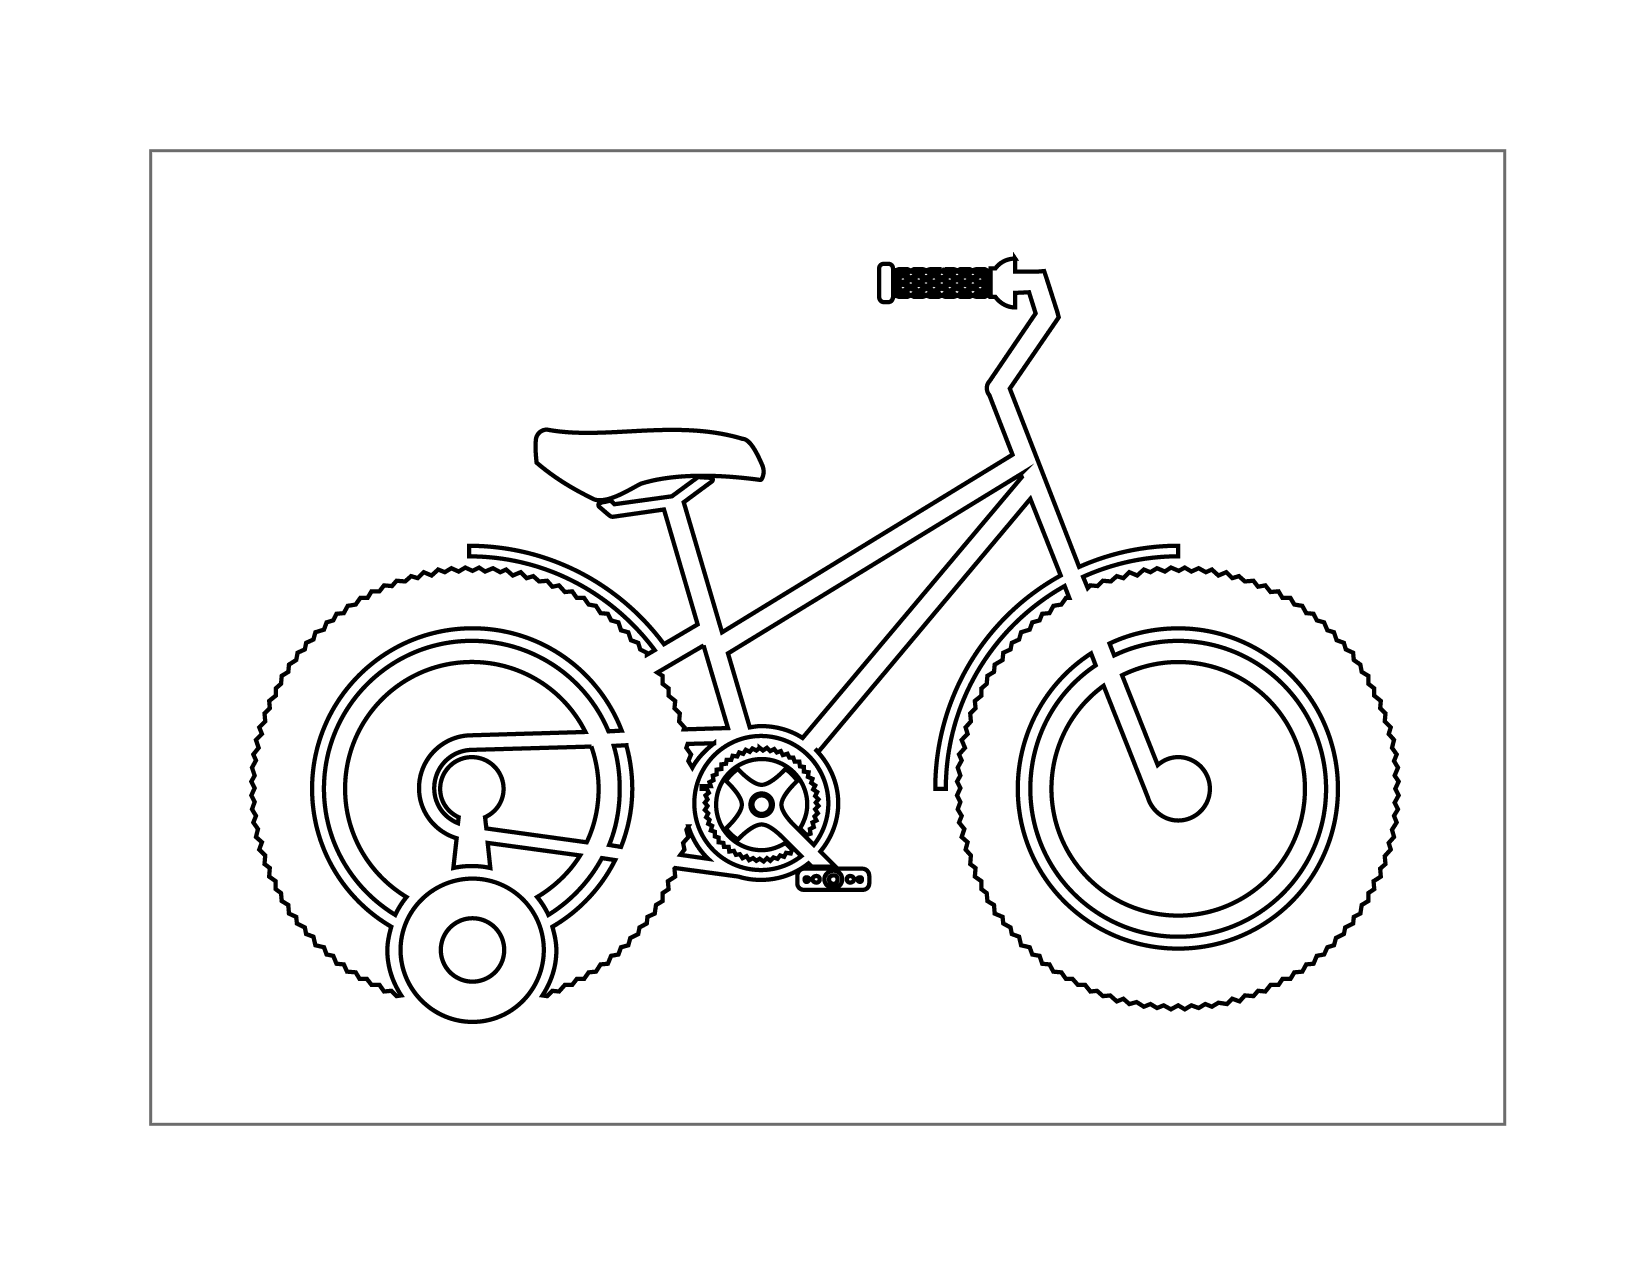 Bicycle With Training Wheels Coloring Page